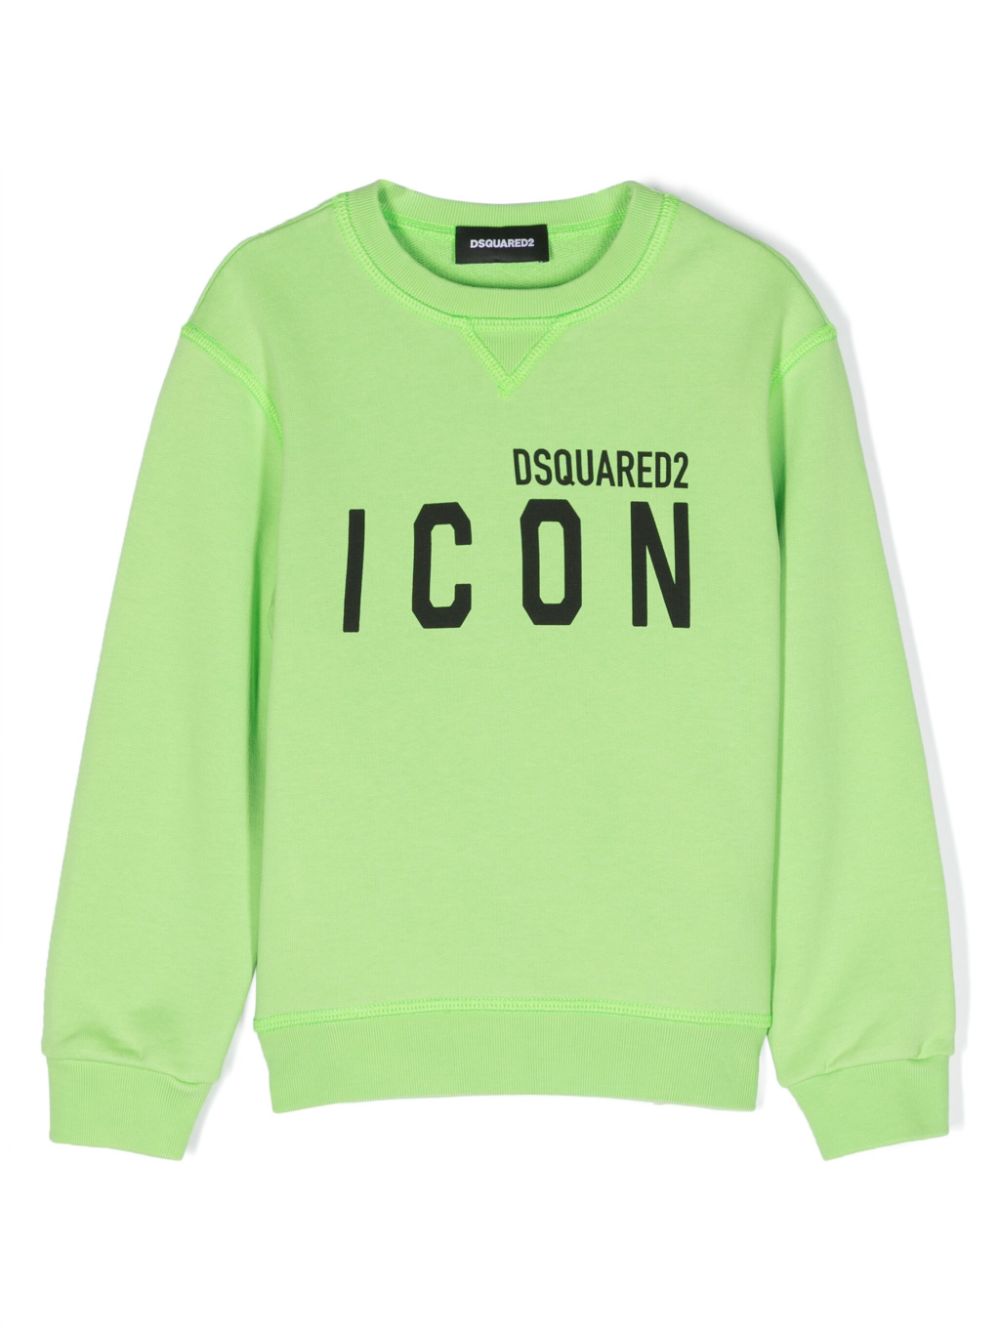 Green sweatshirt for boys with ICON print